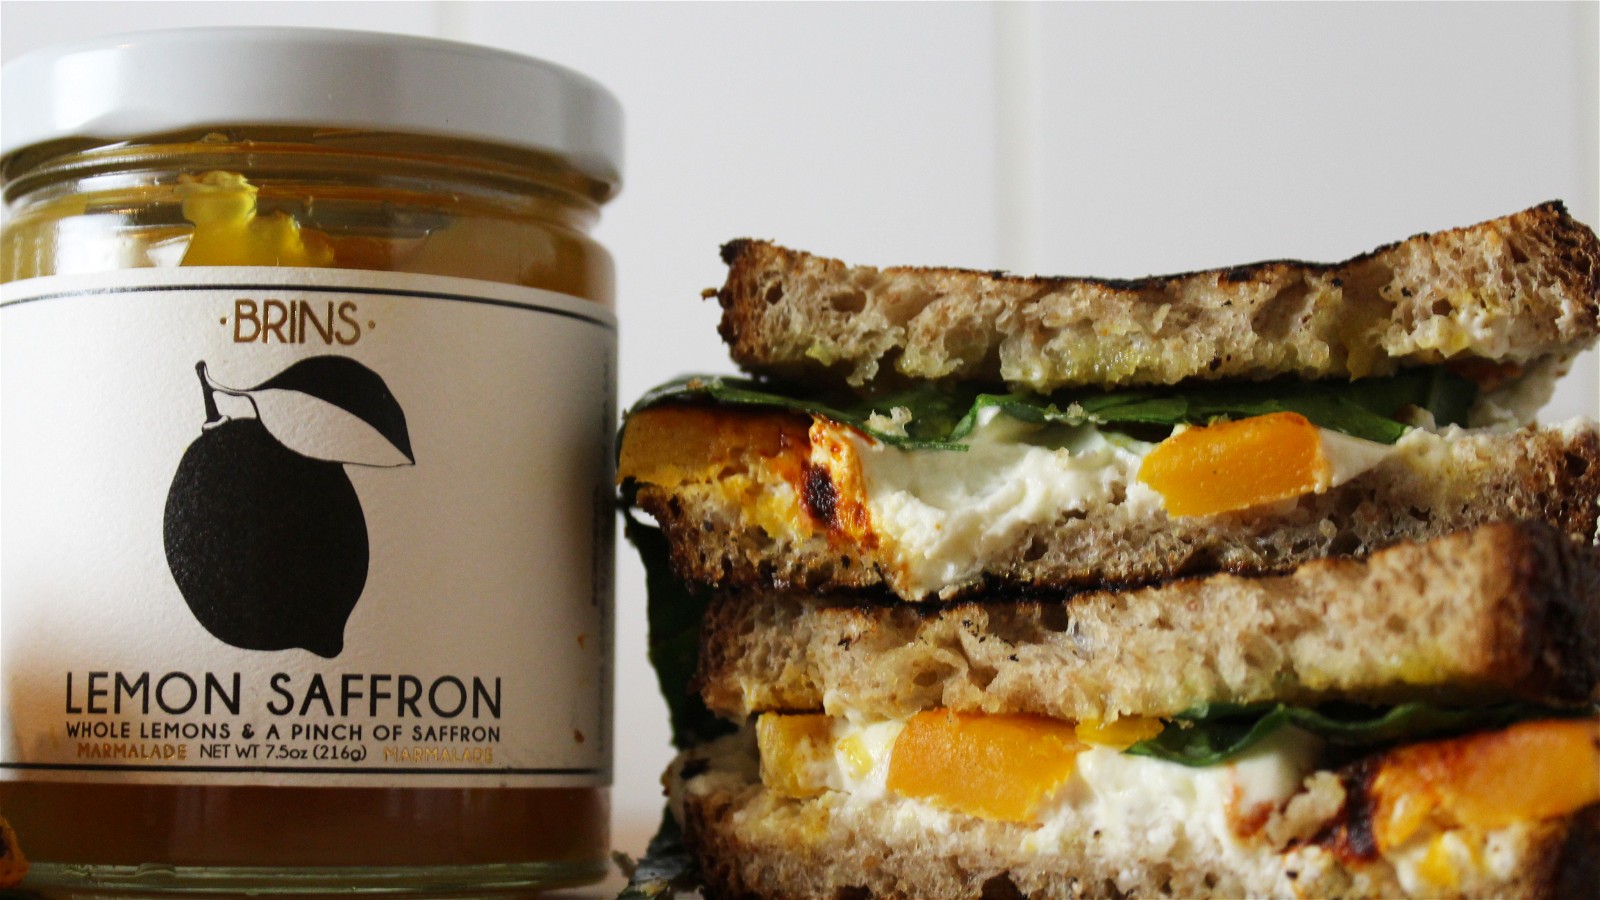 Image of Grilled Cheese with Goat Cheese, Butternut Squash, and Brin's Lemon Saffron Jam